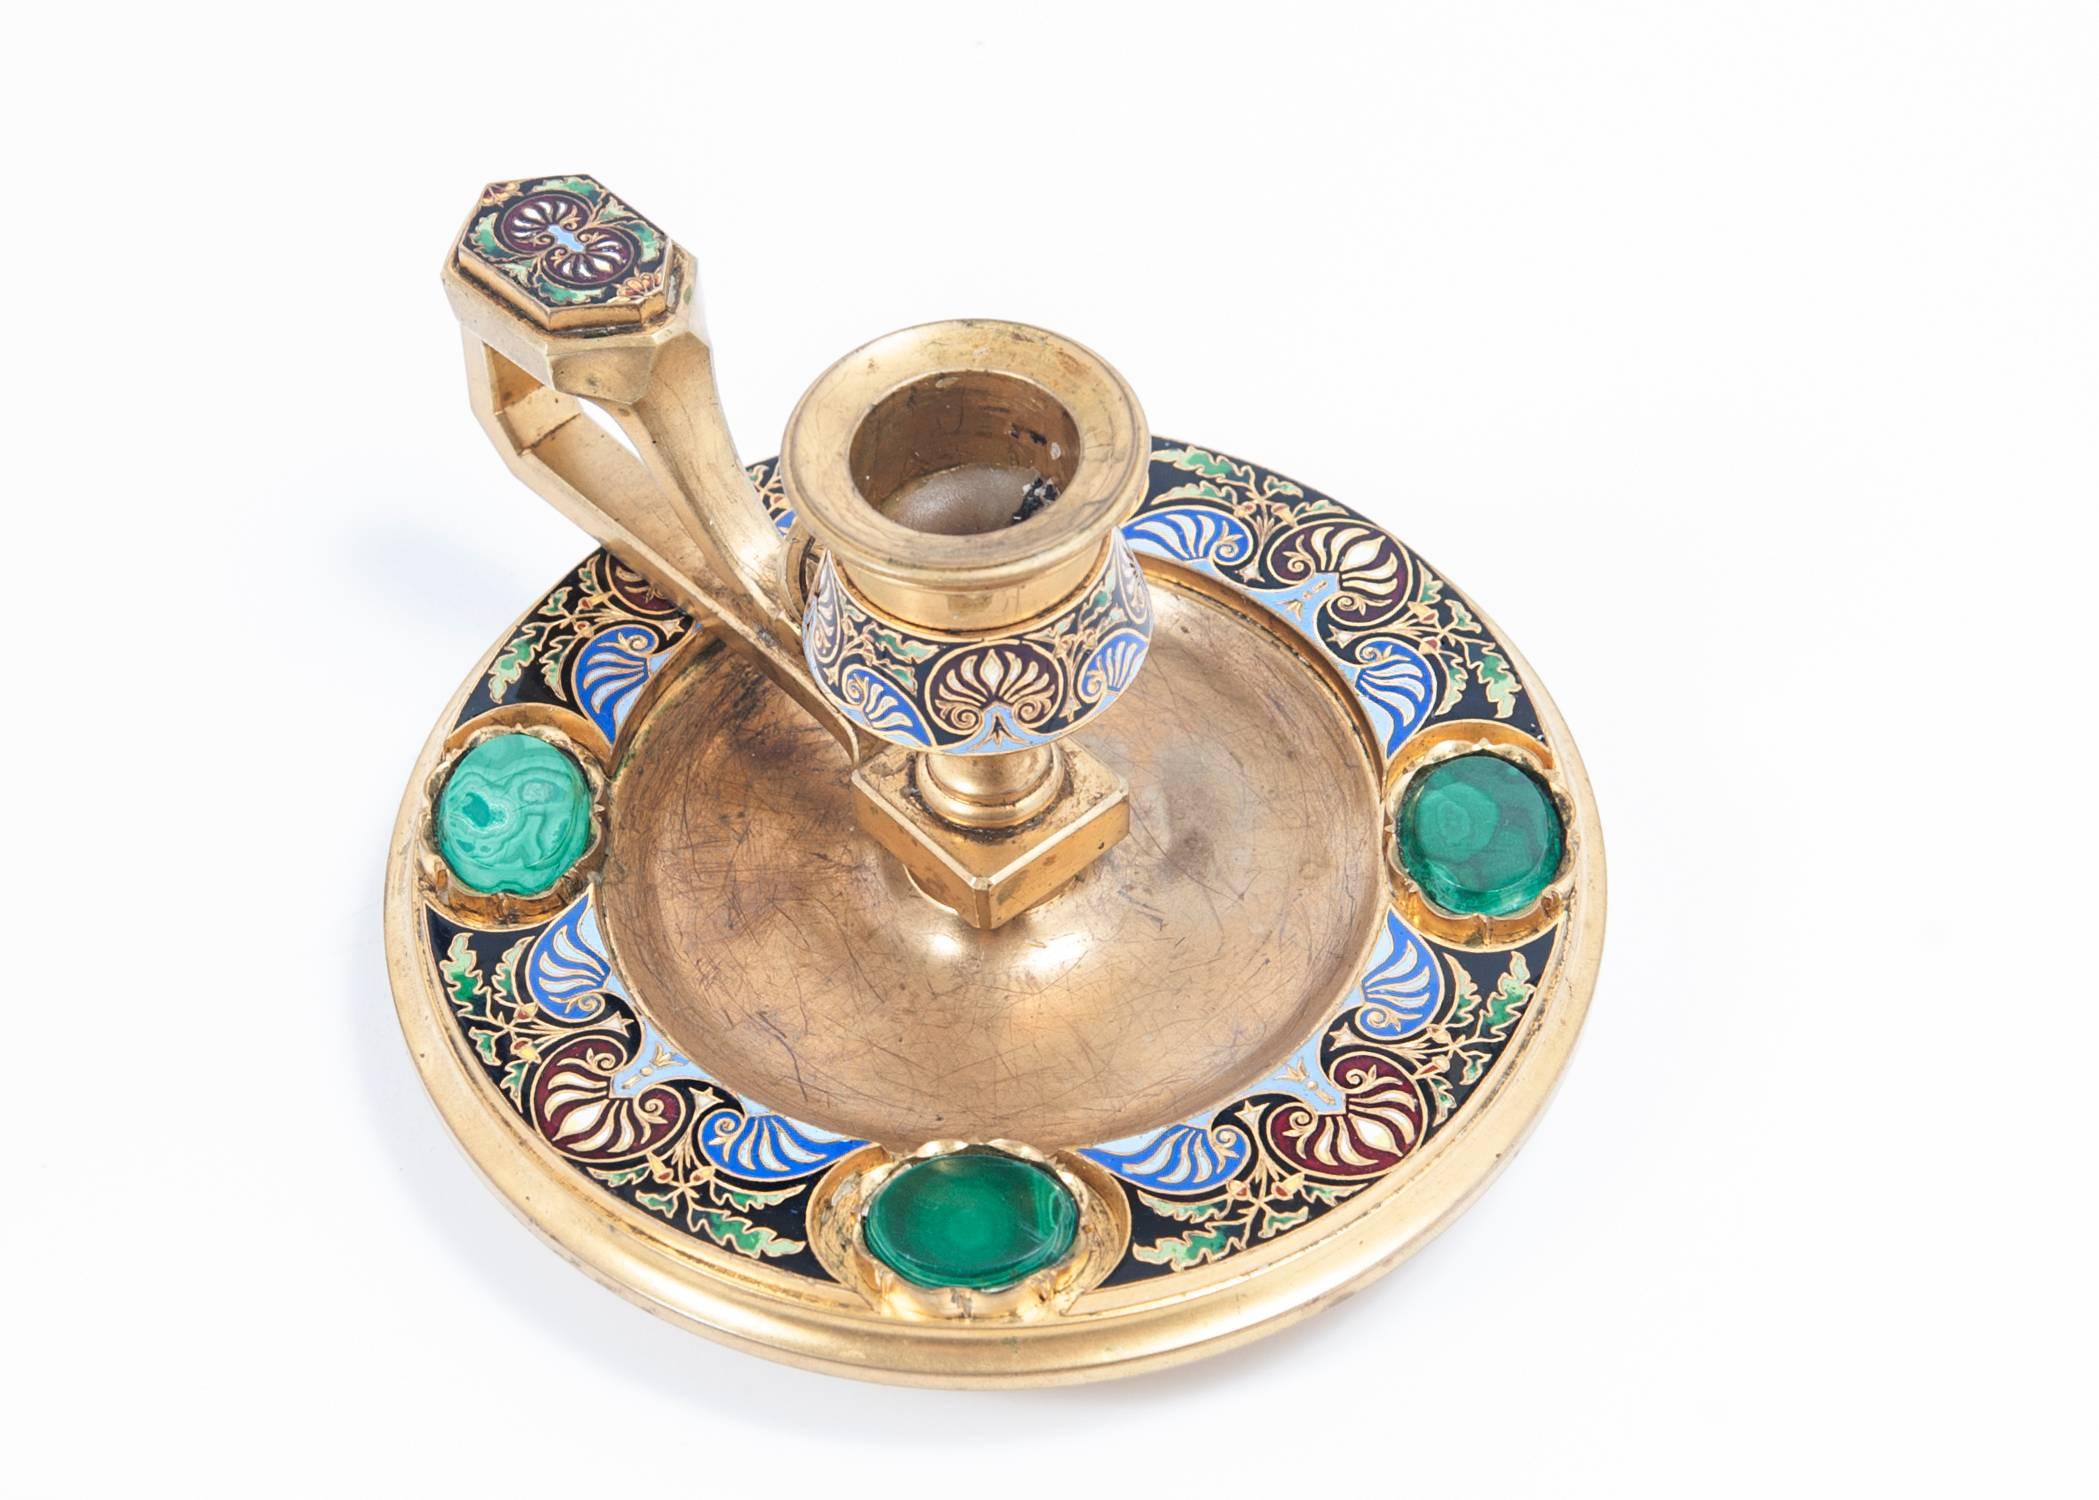 High-Quality Ormolu Russian Candlestick with Enamel and Malachite Decorations In Good Condition For Sale In Amsterdam, Noord Holland